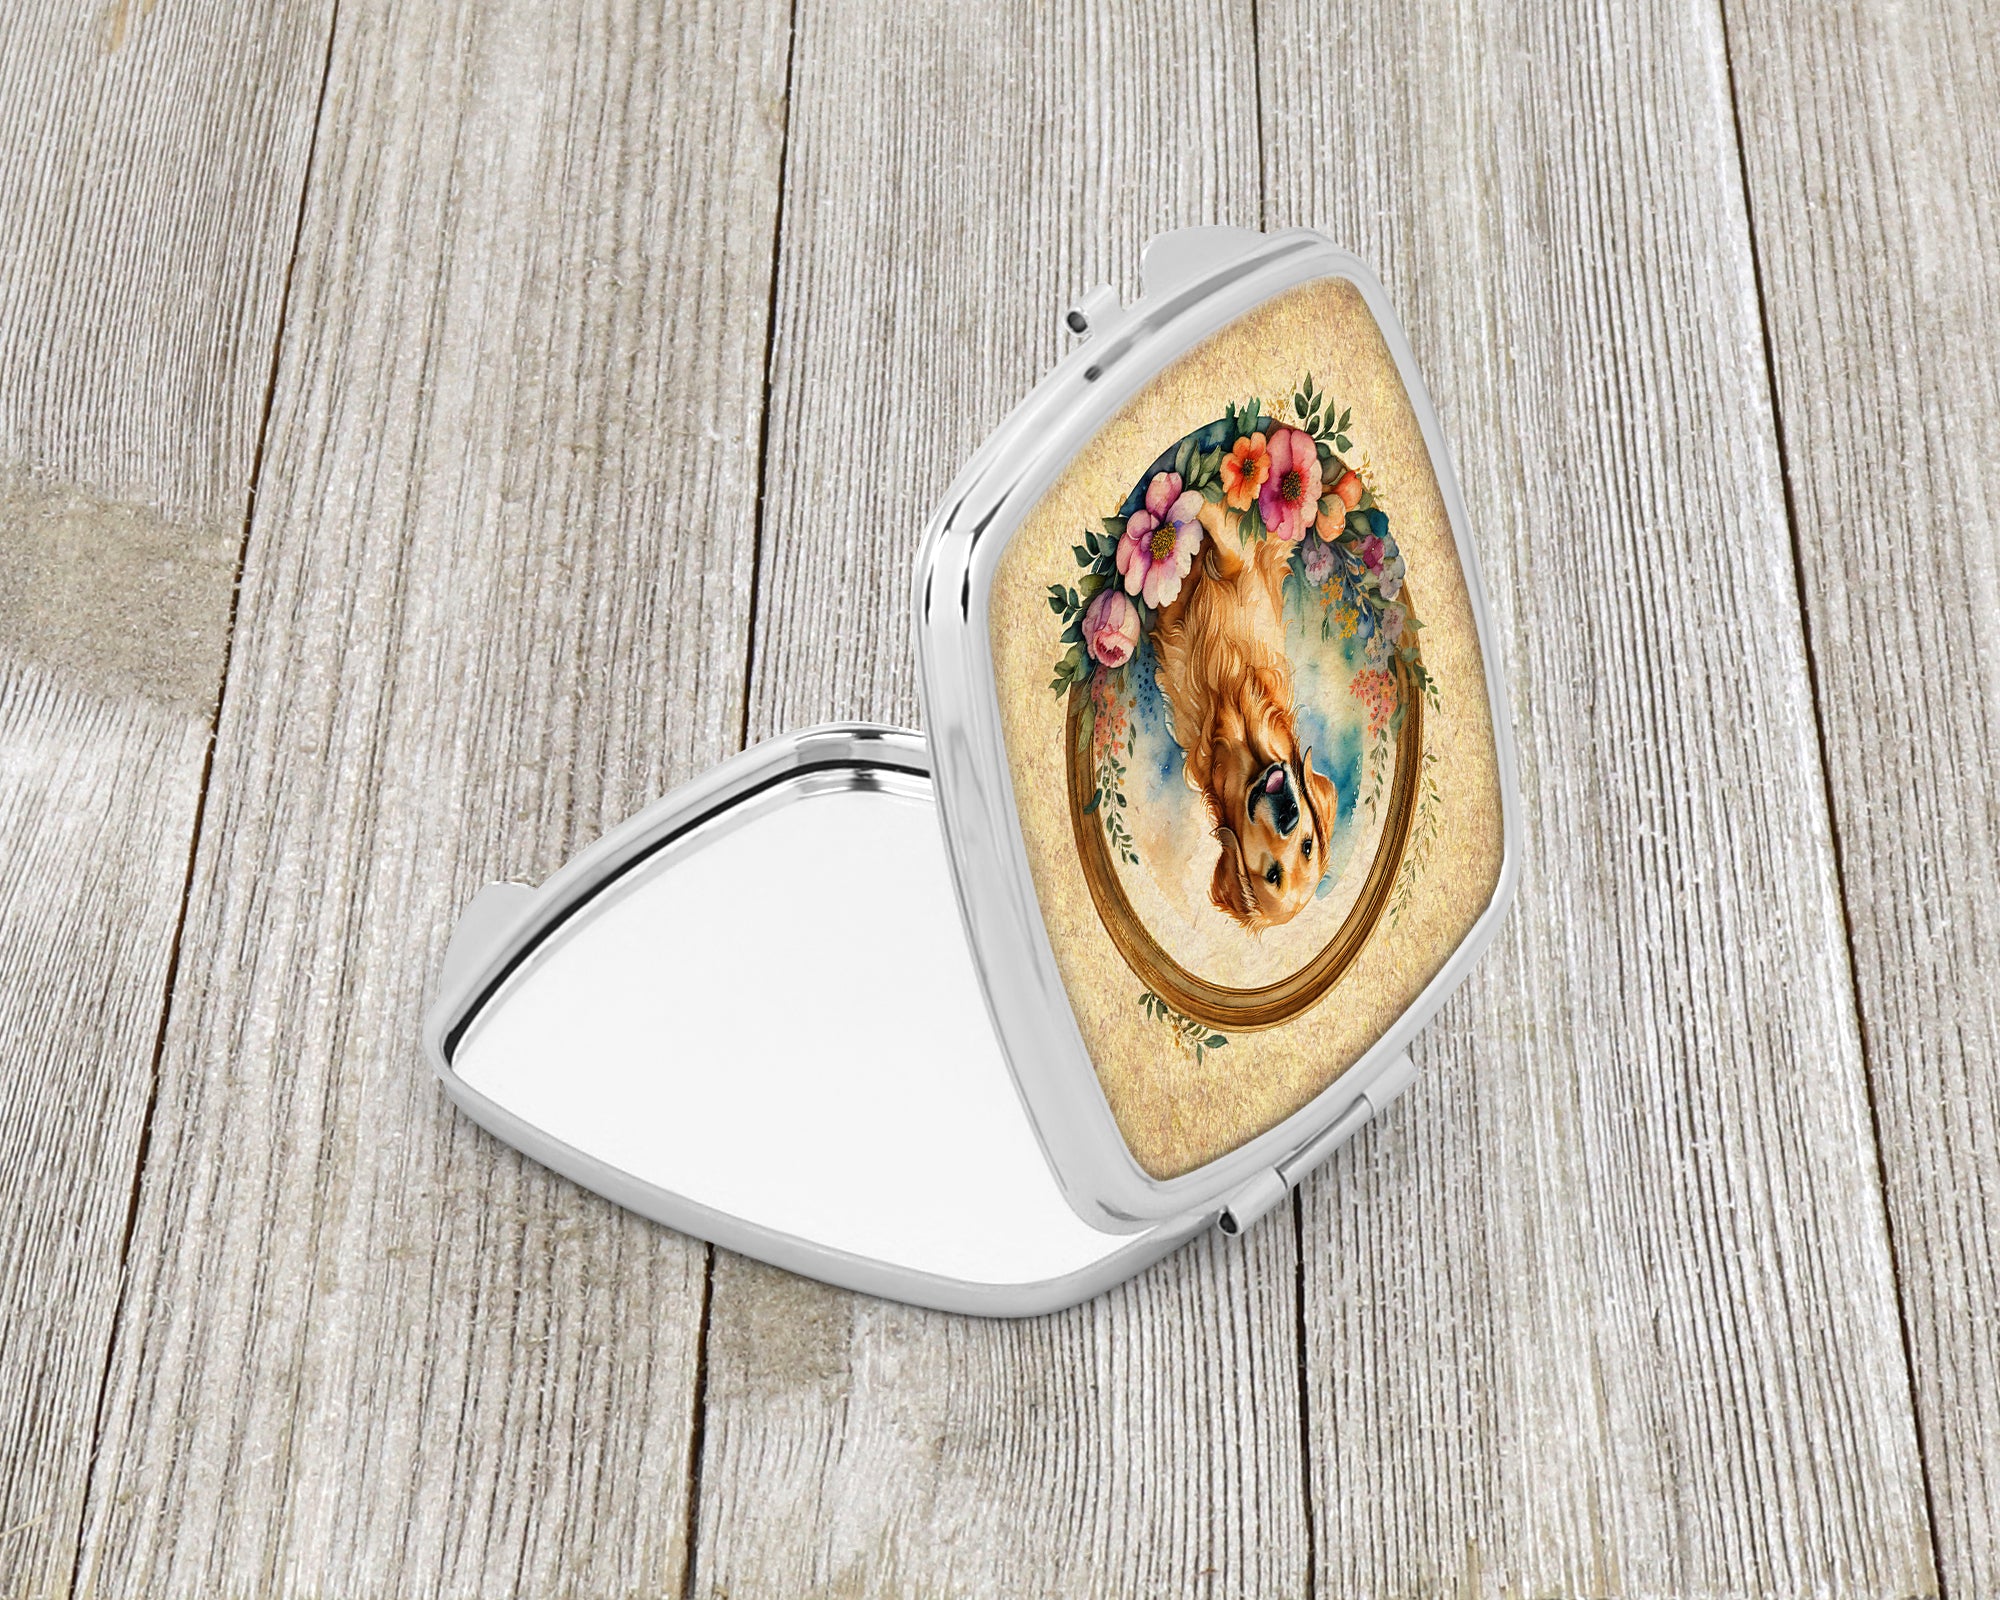 Buy this Golden Retriever and Flowers Compact Mirror